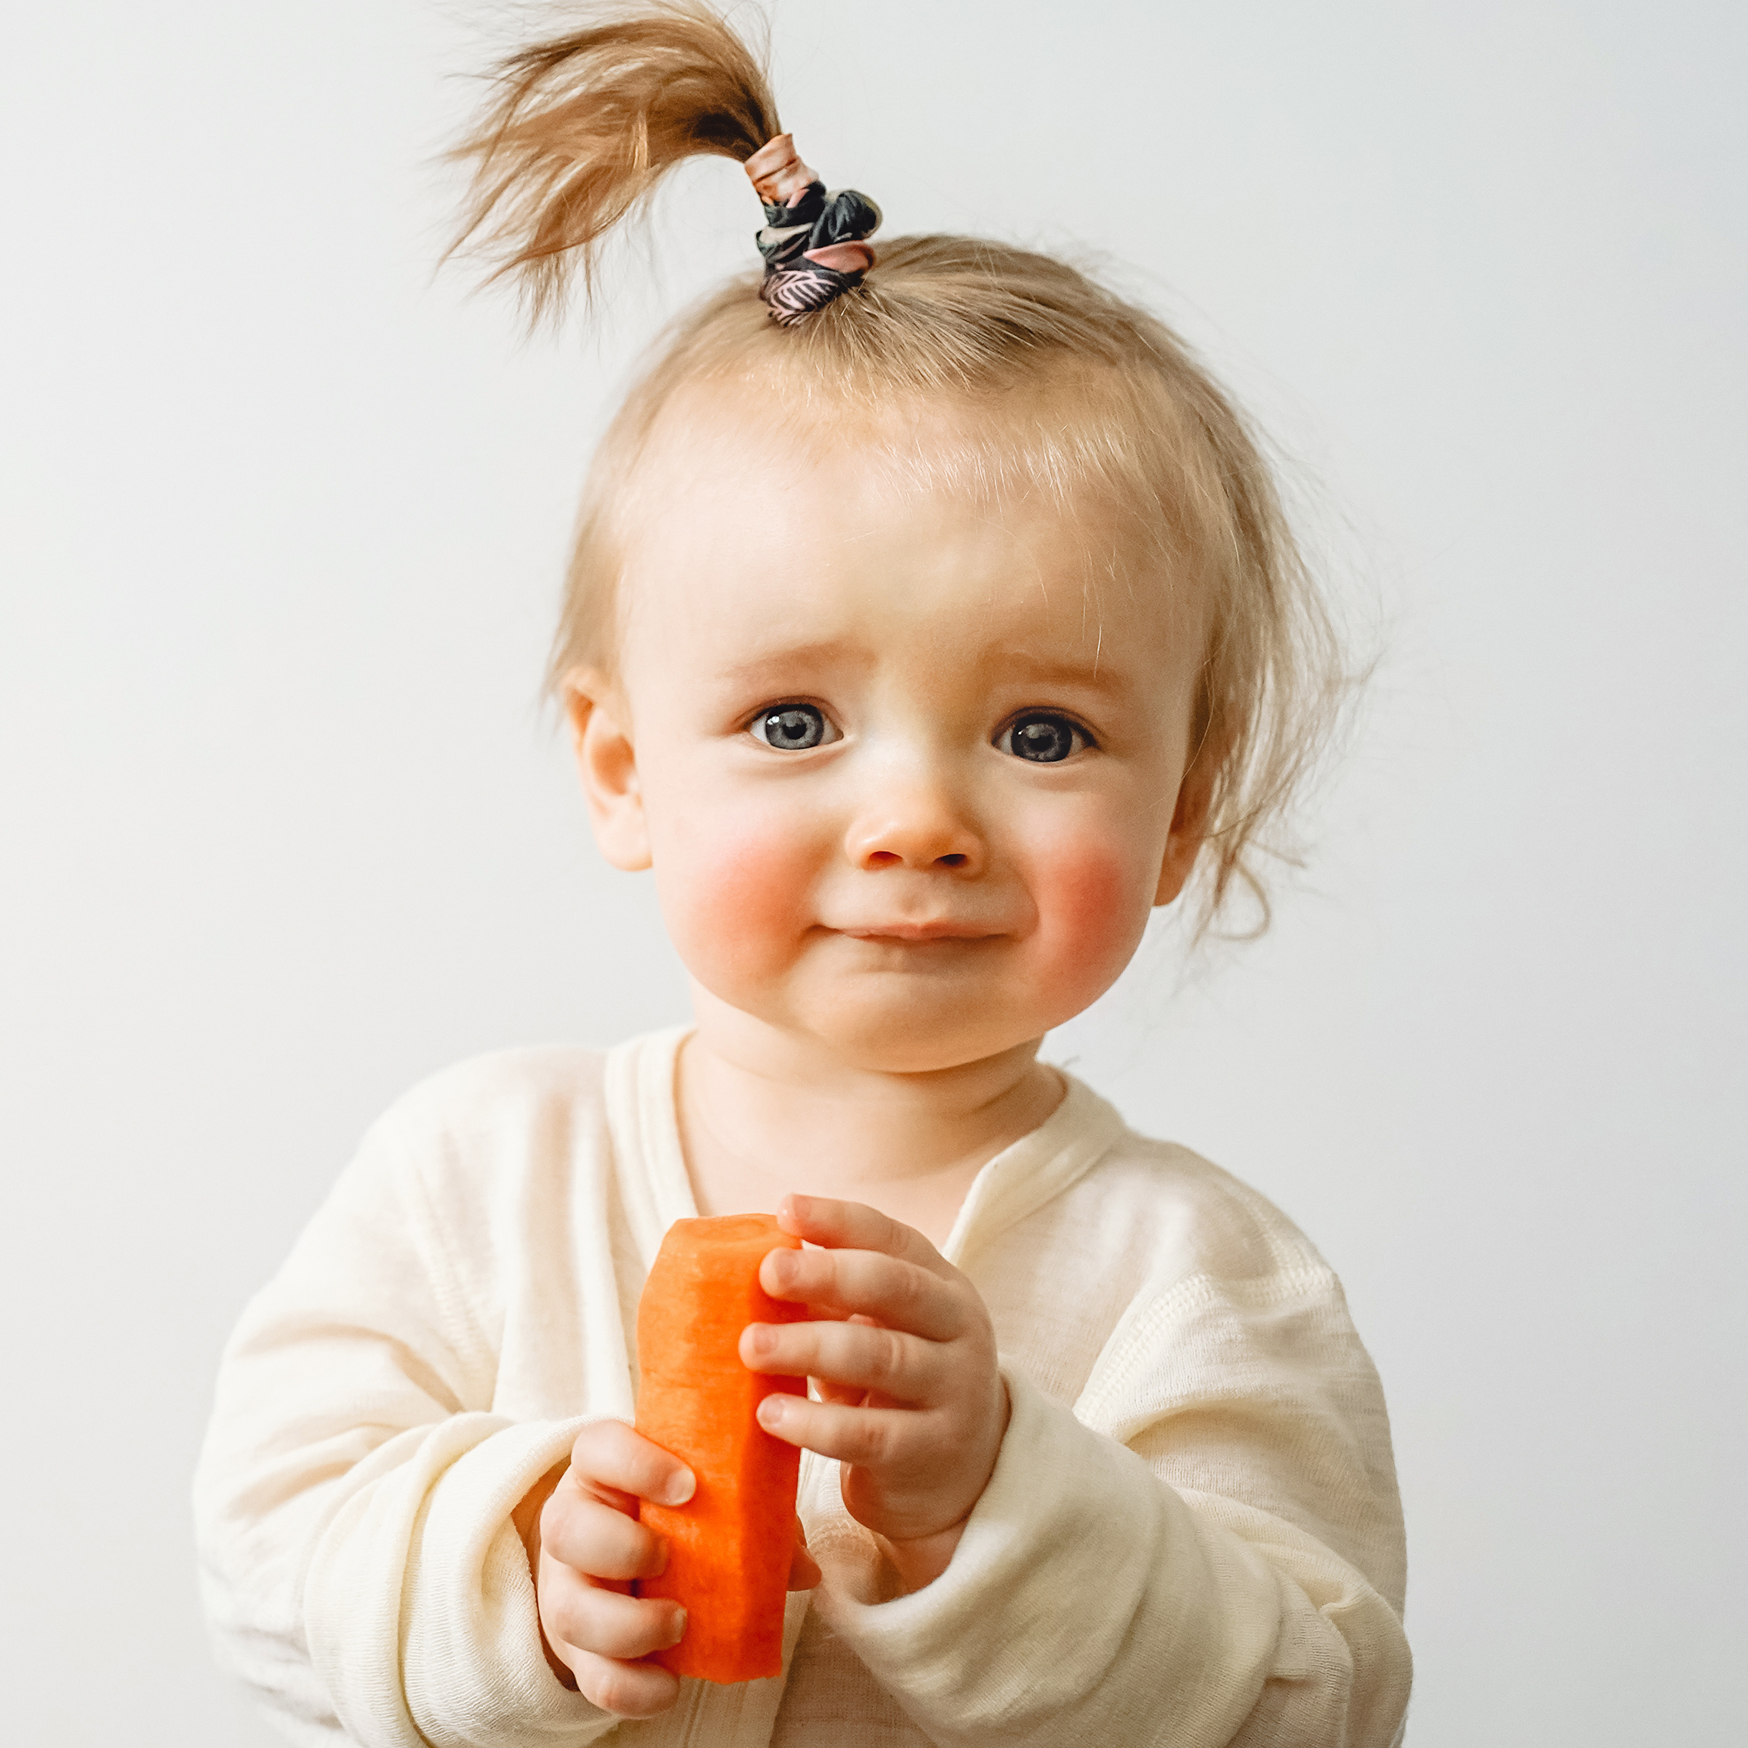 Oral Immunotherapy (OIT) for Food Allergies